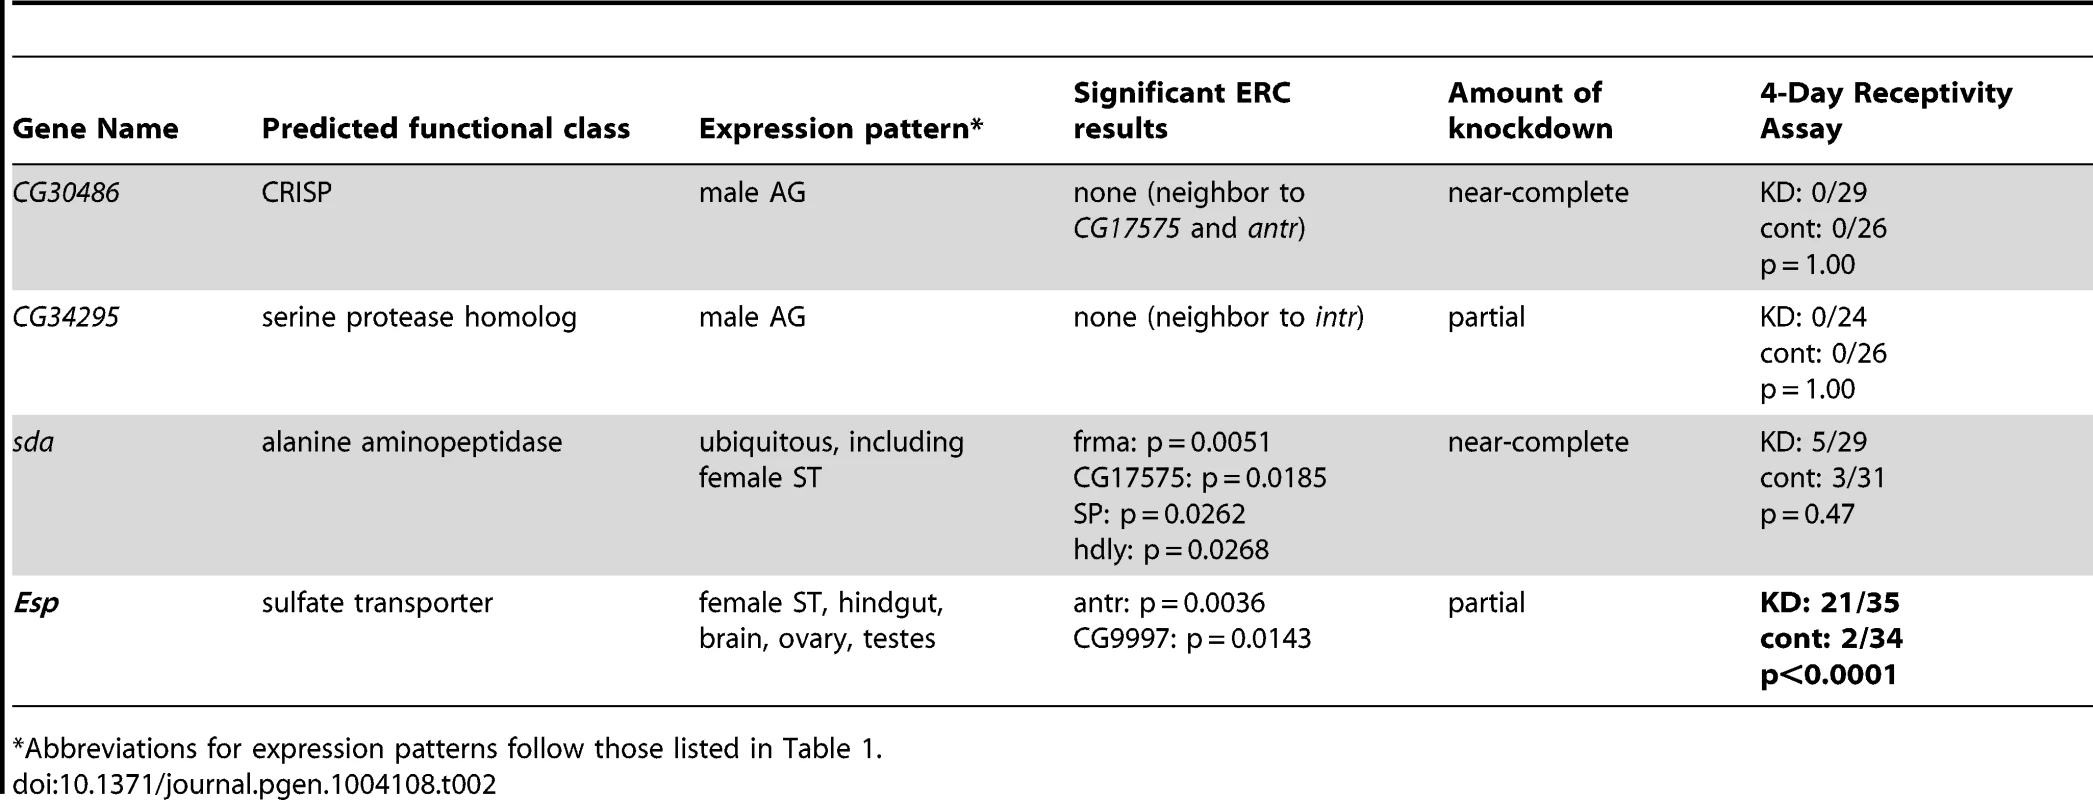 Tests of neighboring genes and additional ERC candidates for 4-day receptivity phenotypes.